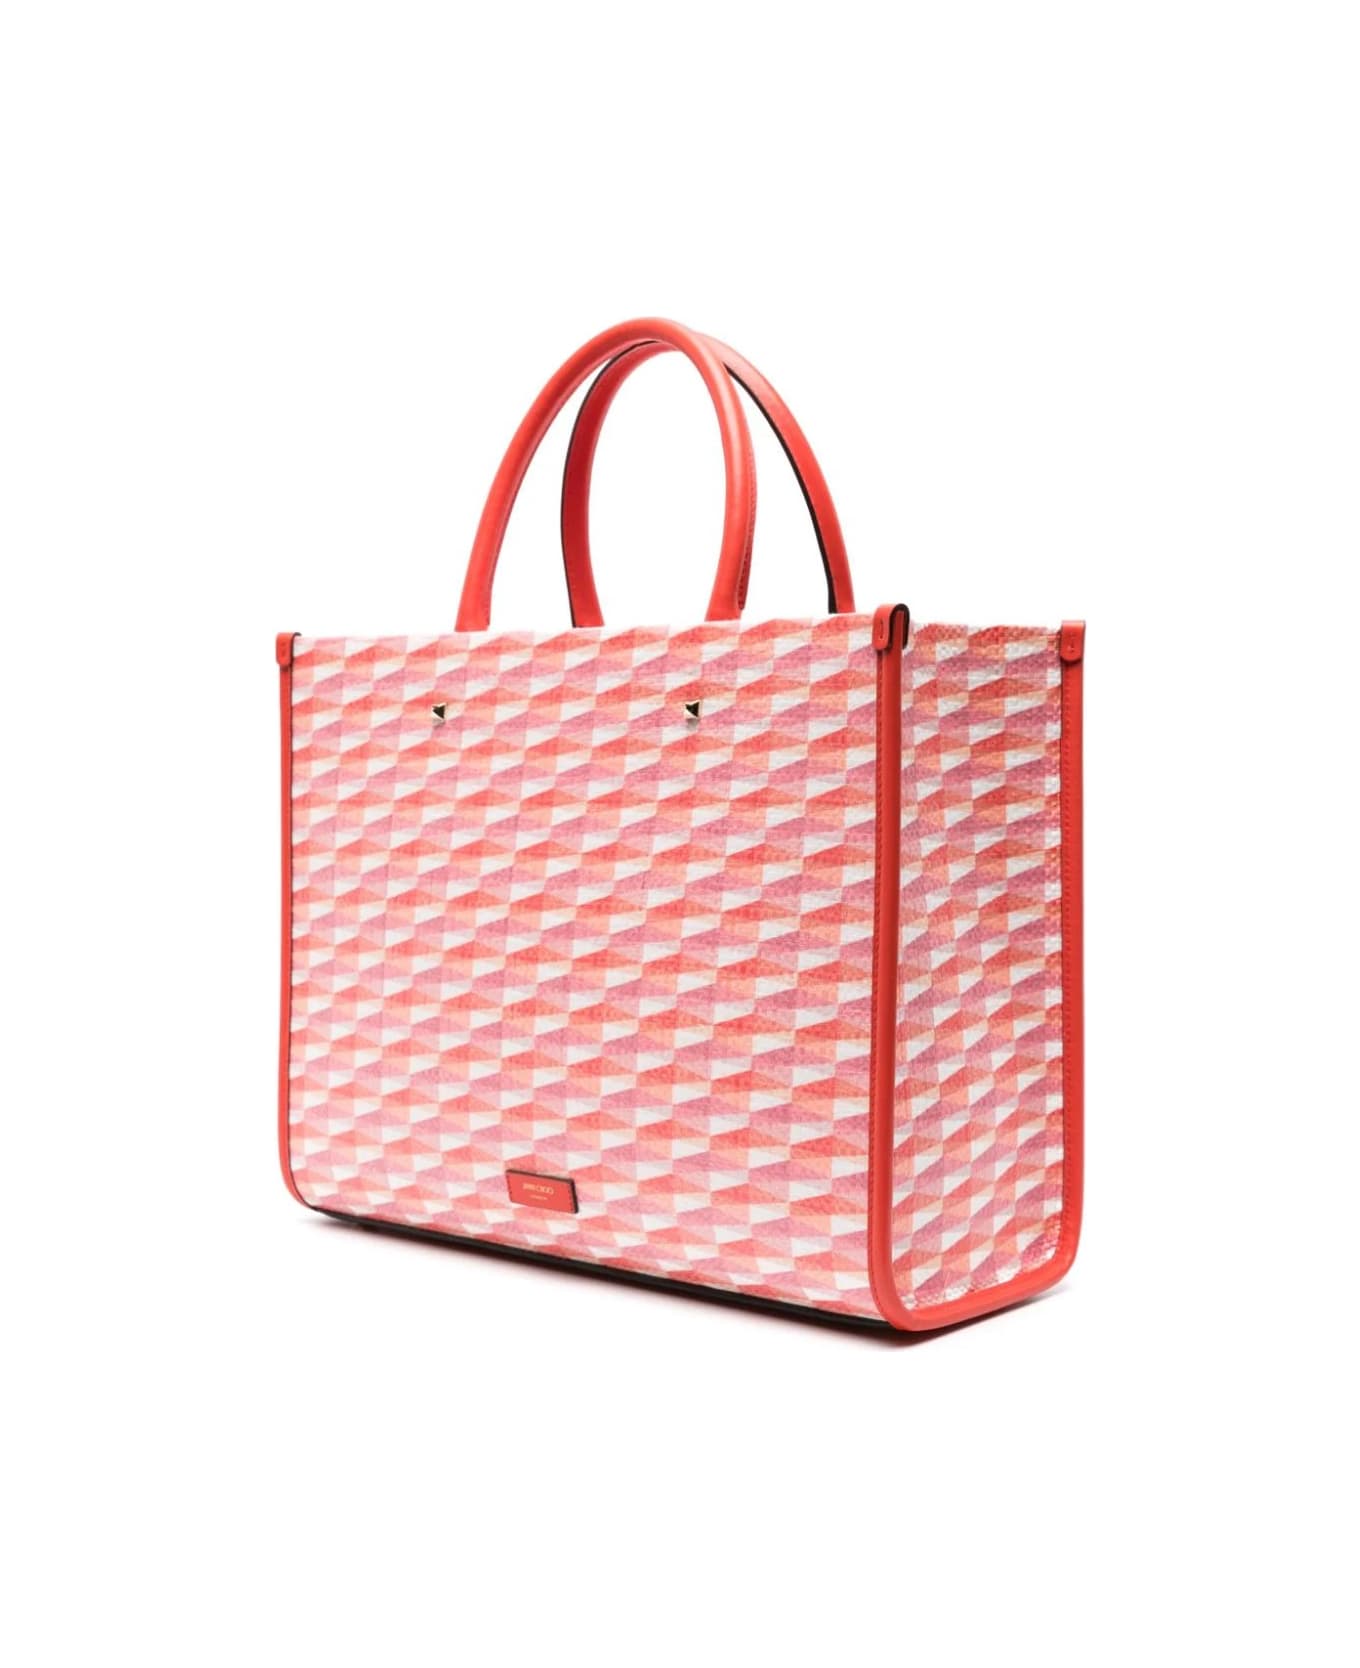 Jimmy Choo Avenue M Tote Bag In Paprika/mix Rosa Confetto - Red